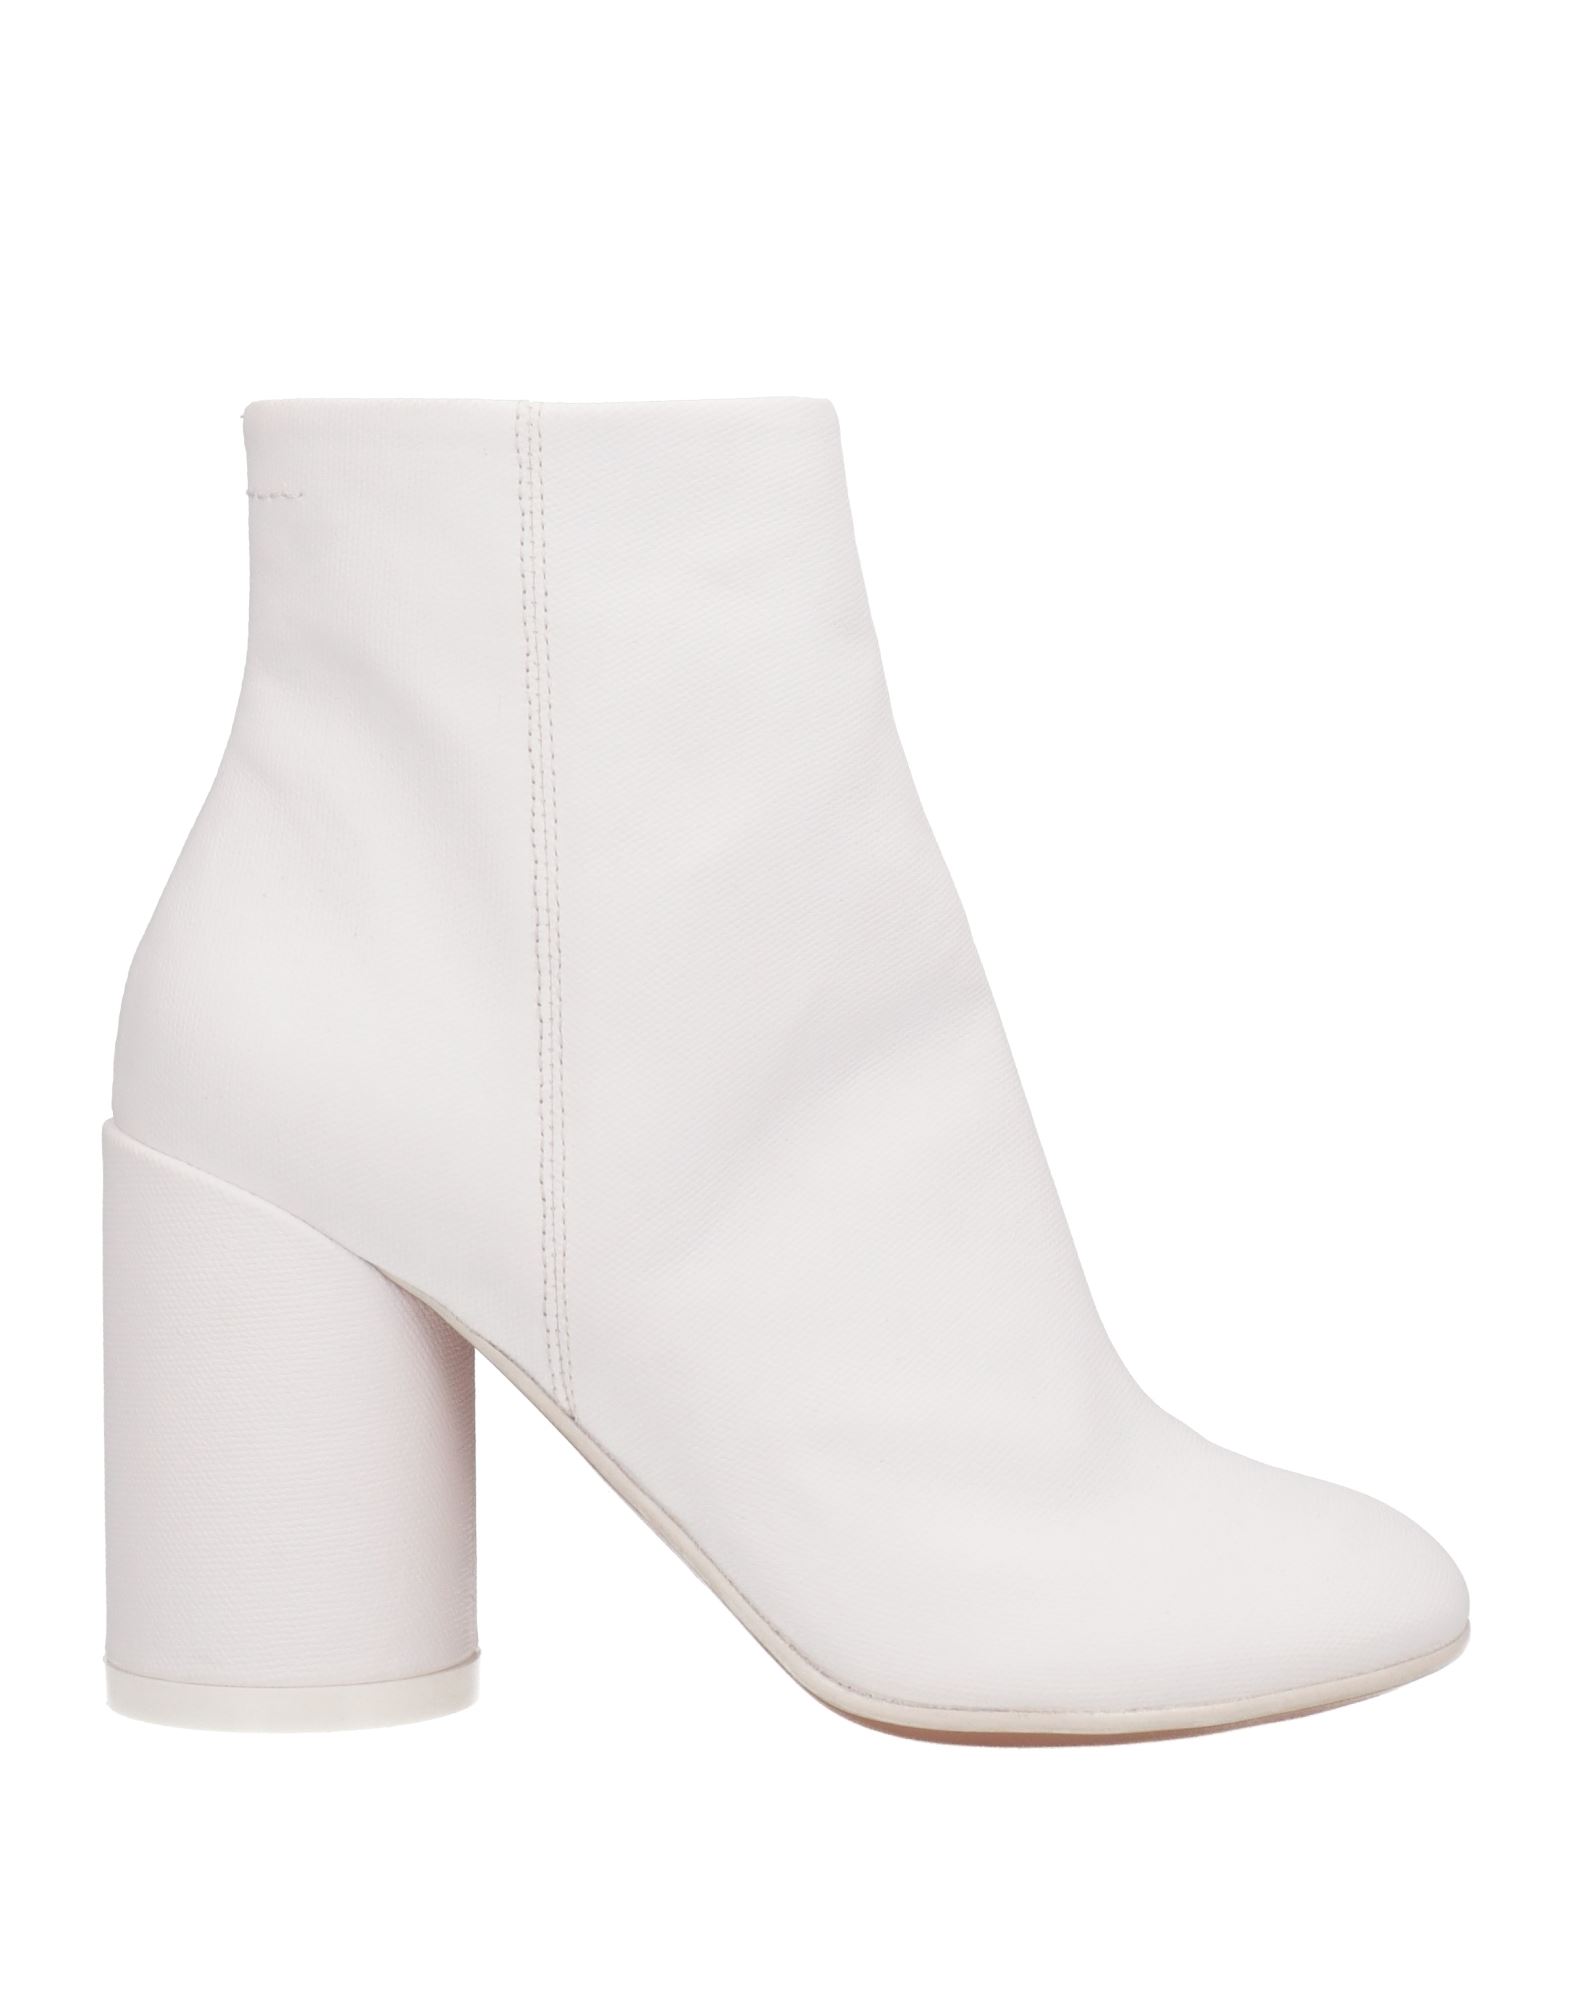 Mm6 Maison Margiela Ankle Boots In White